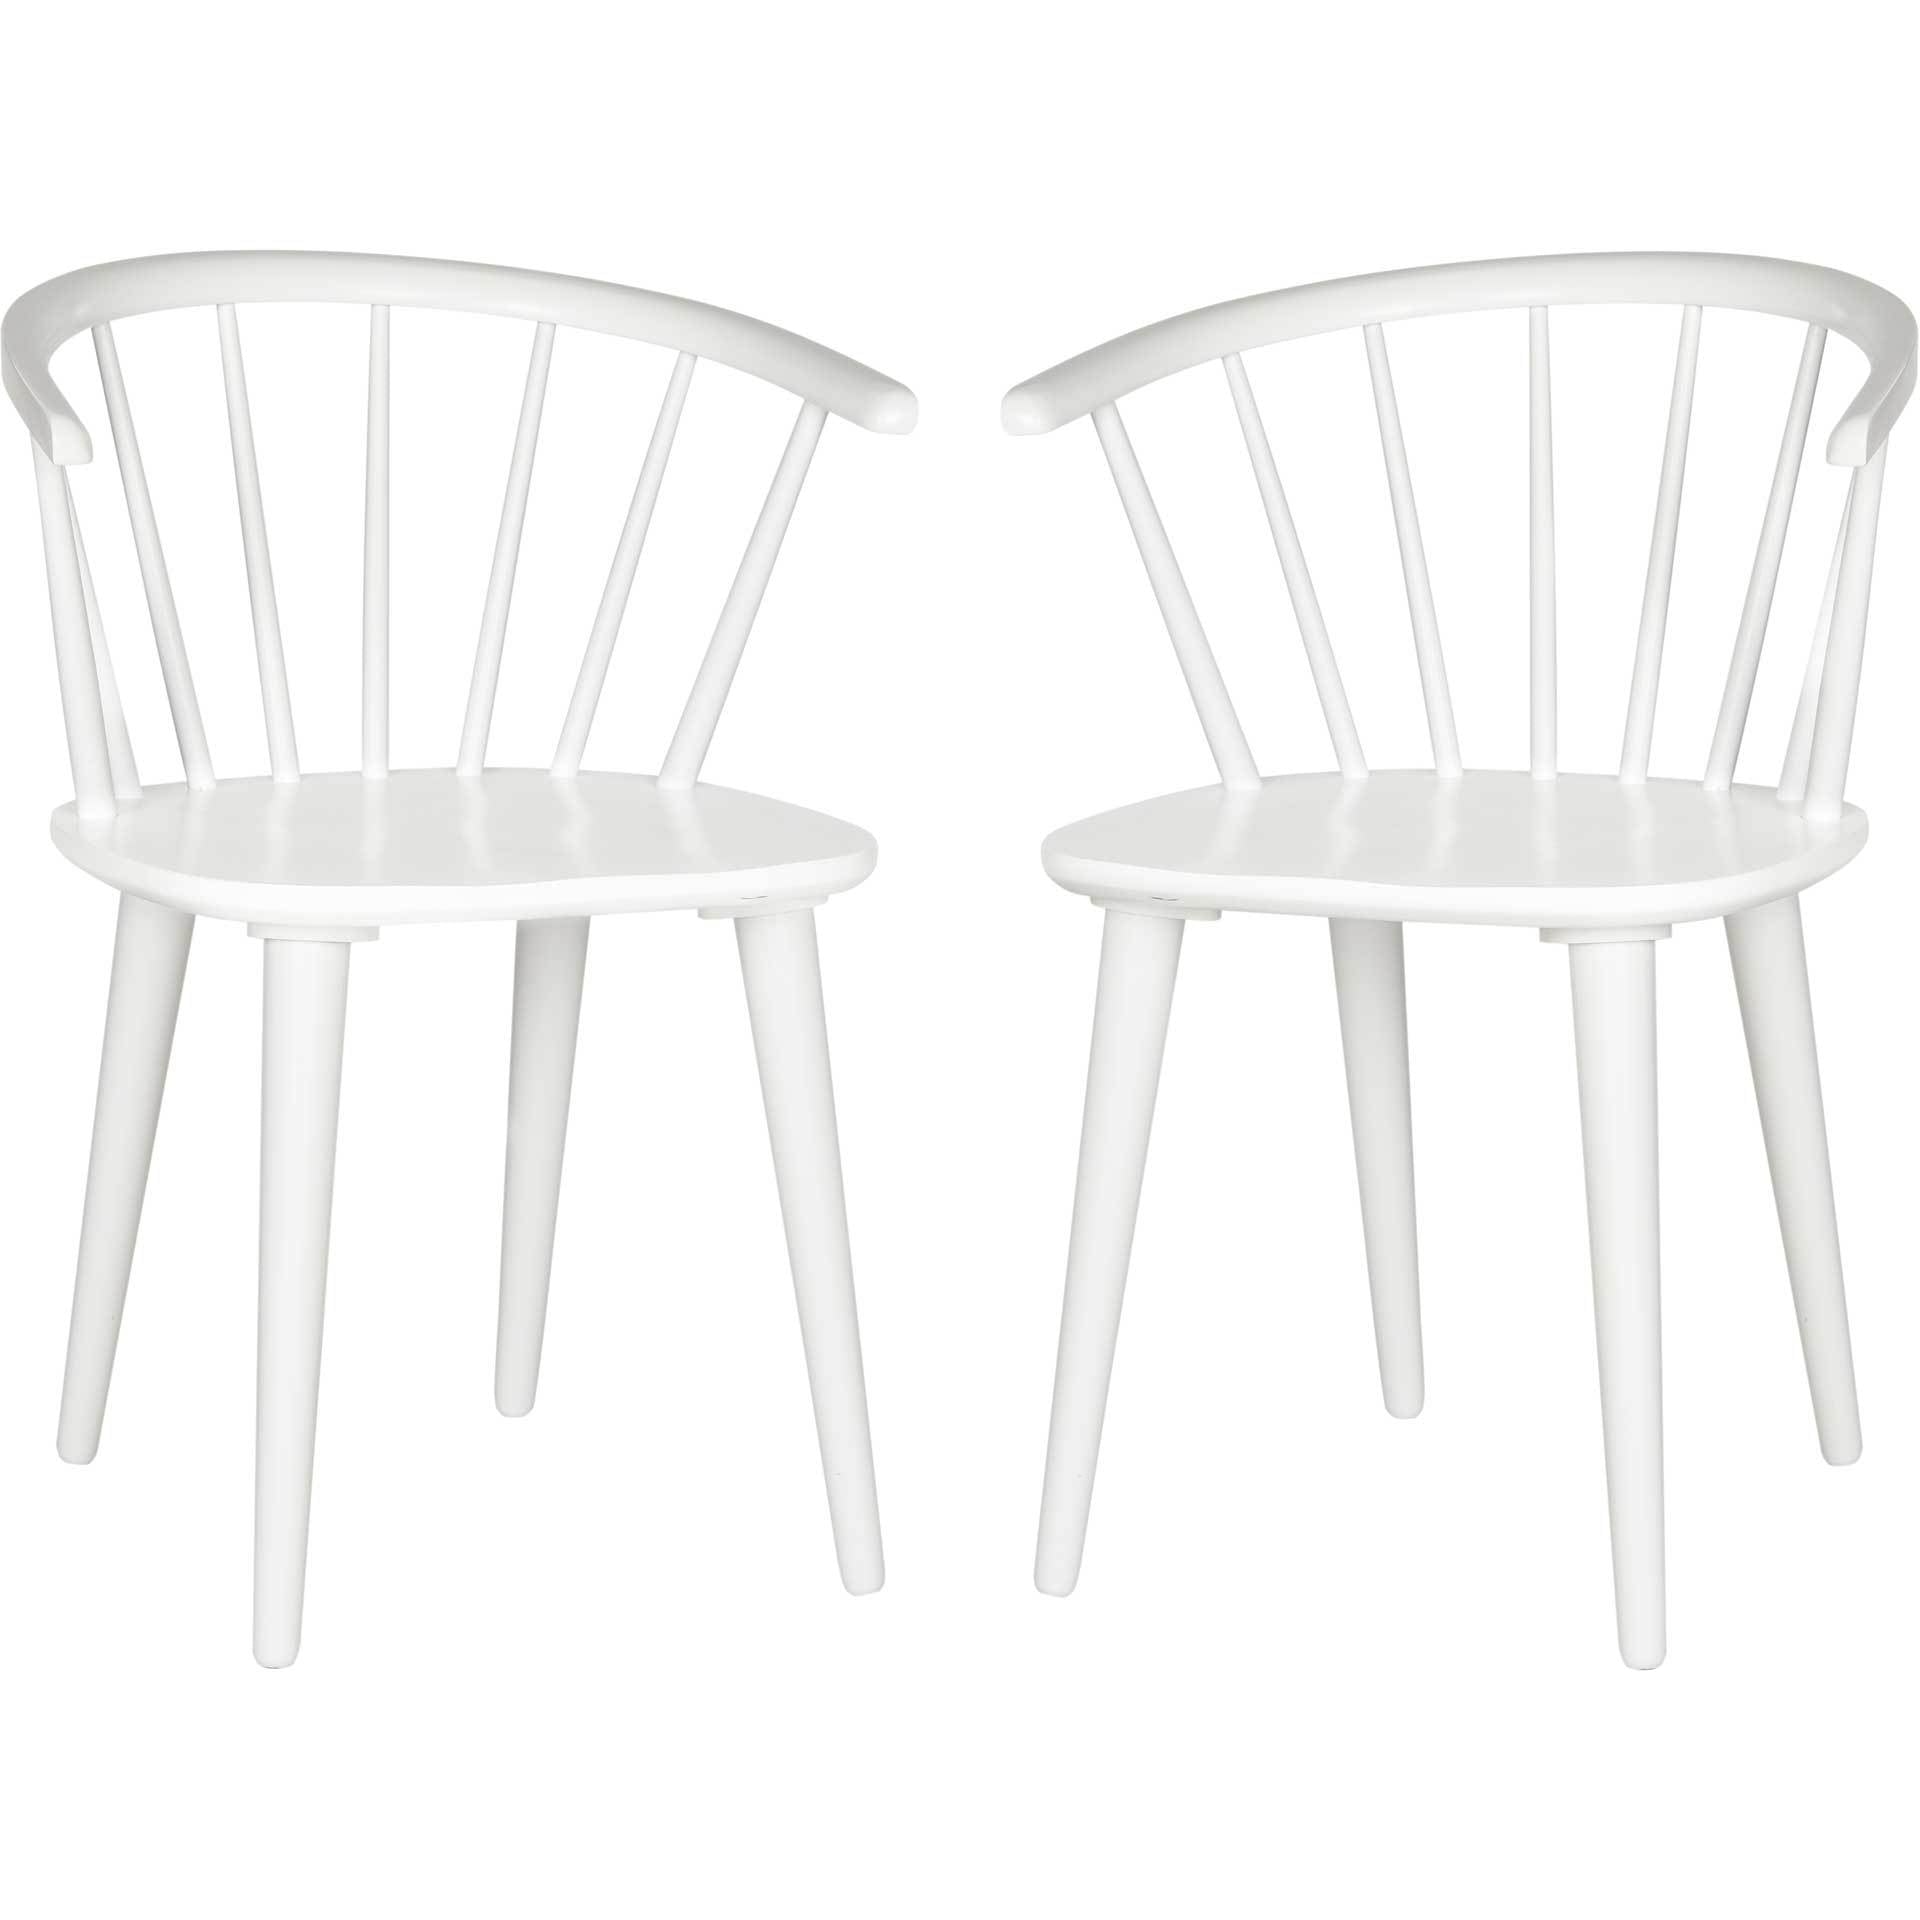 Blair Curved Spindle Side Chair White (Set of 2)